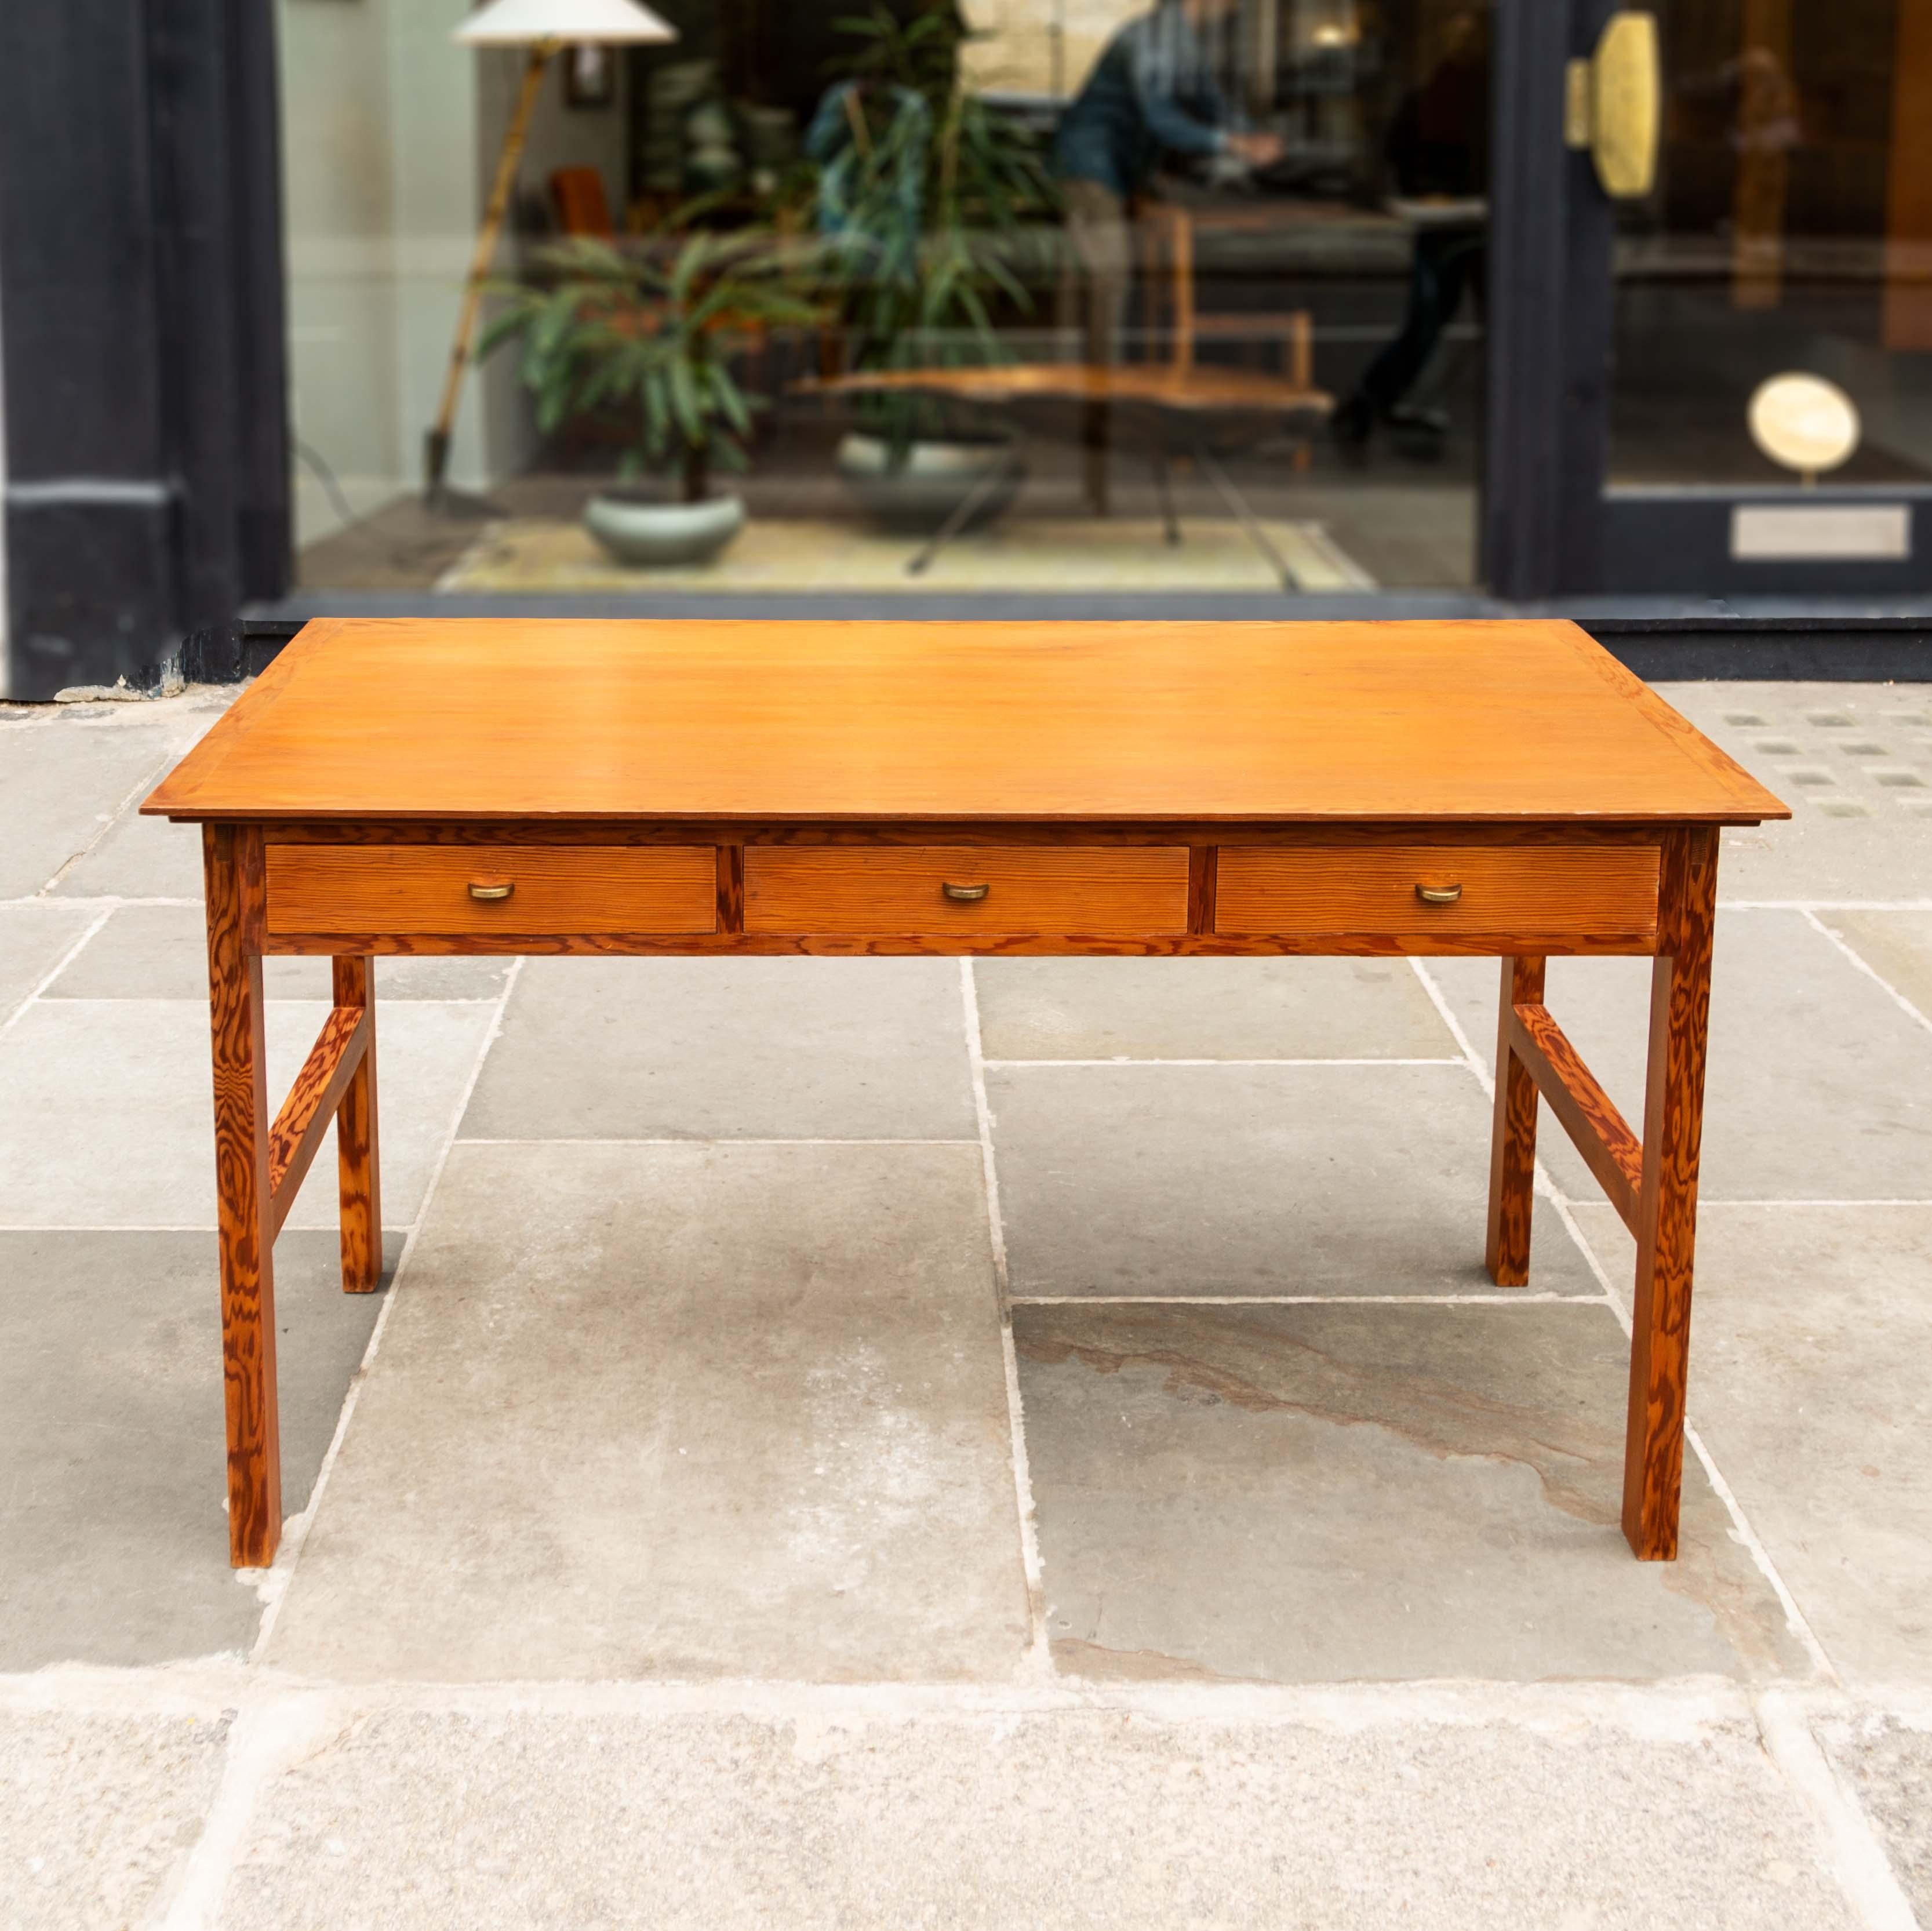 A well proportioned vintage desk made in Denmark, circa 1960.The main feature of this desk is the contrast between the plainer quarter-cut solid pine of the table top and drawer fronts, with the tiger-stripe crown-cut timber used in the rest of the